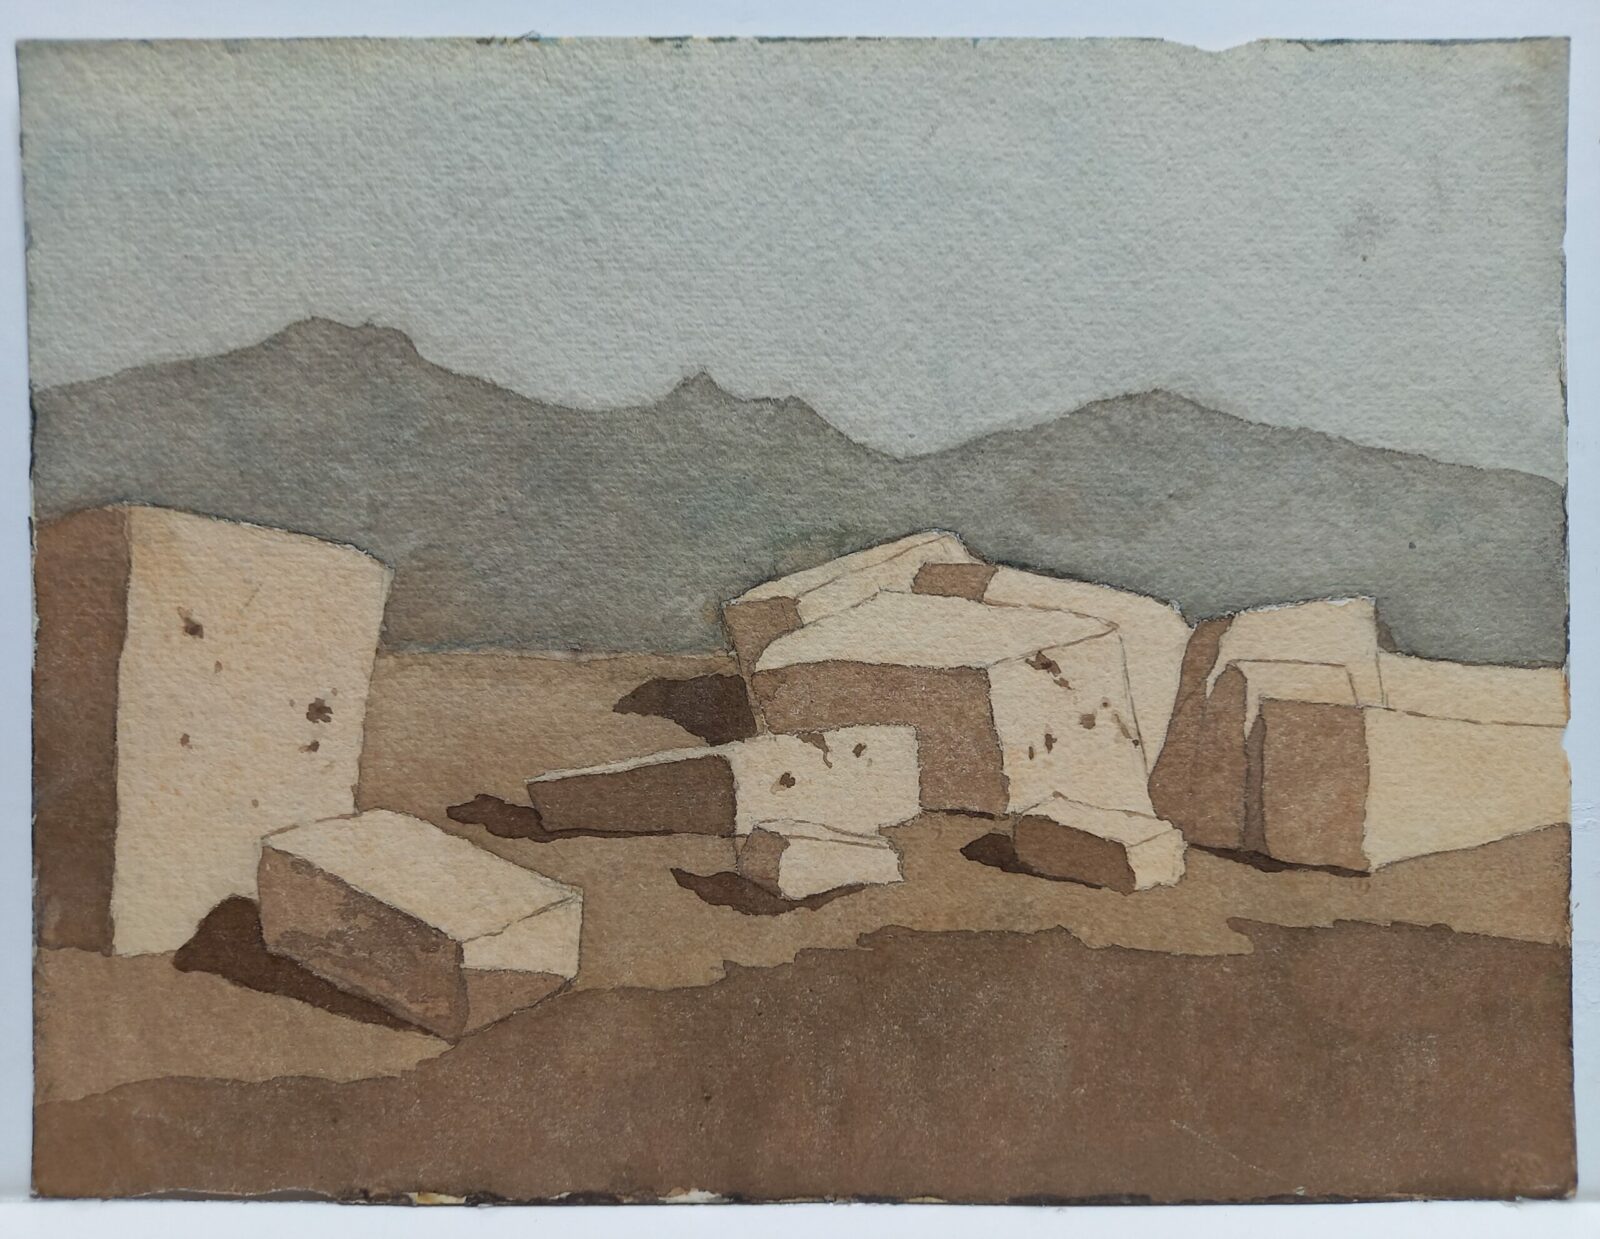 The-rocks-in-the-shape-of-sugar-watercolor